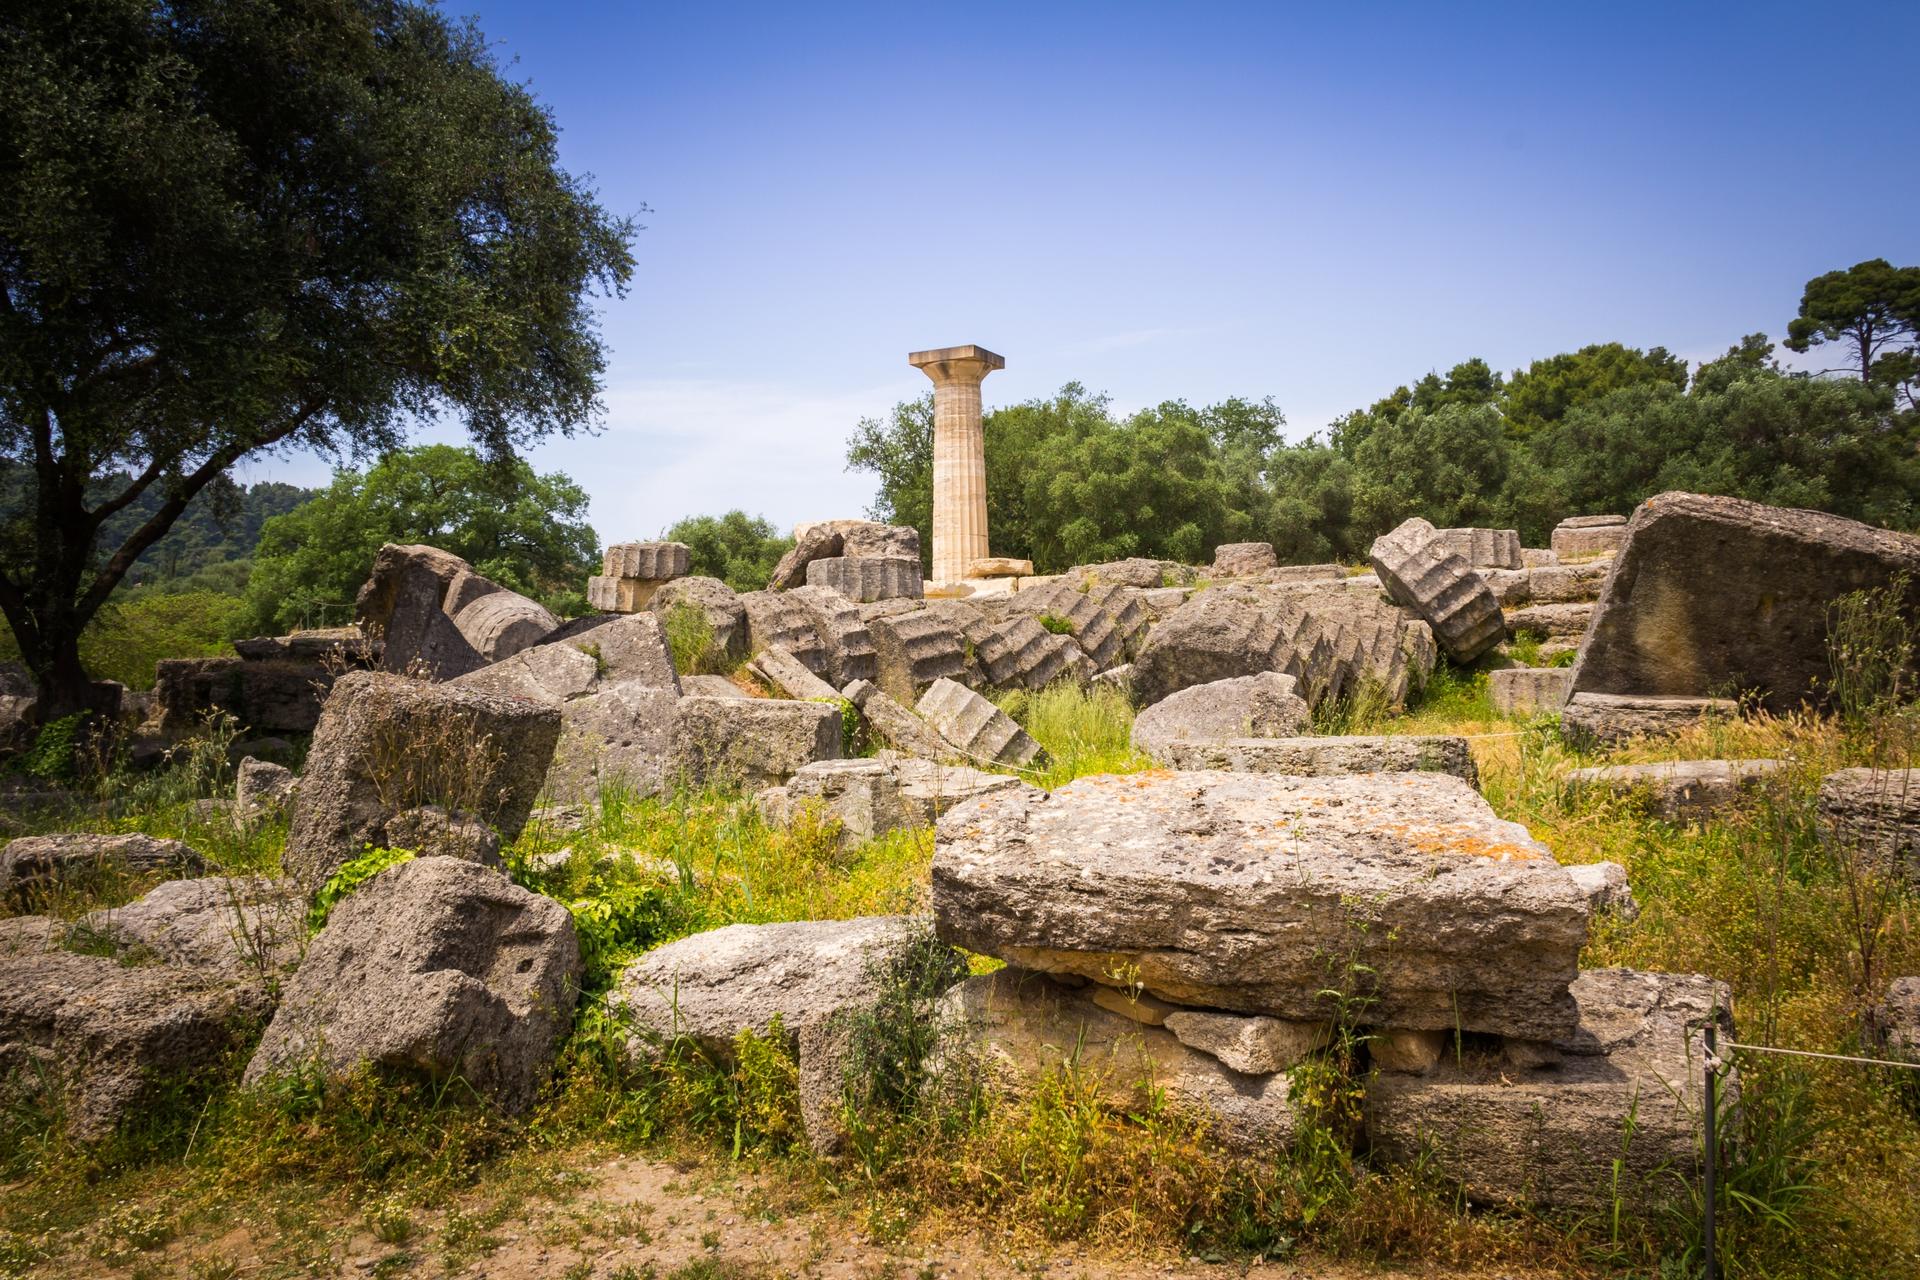 The remains of the Ancient Temple of Zeus at Olympia.